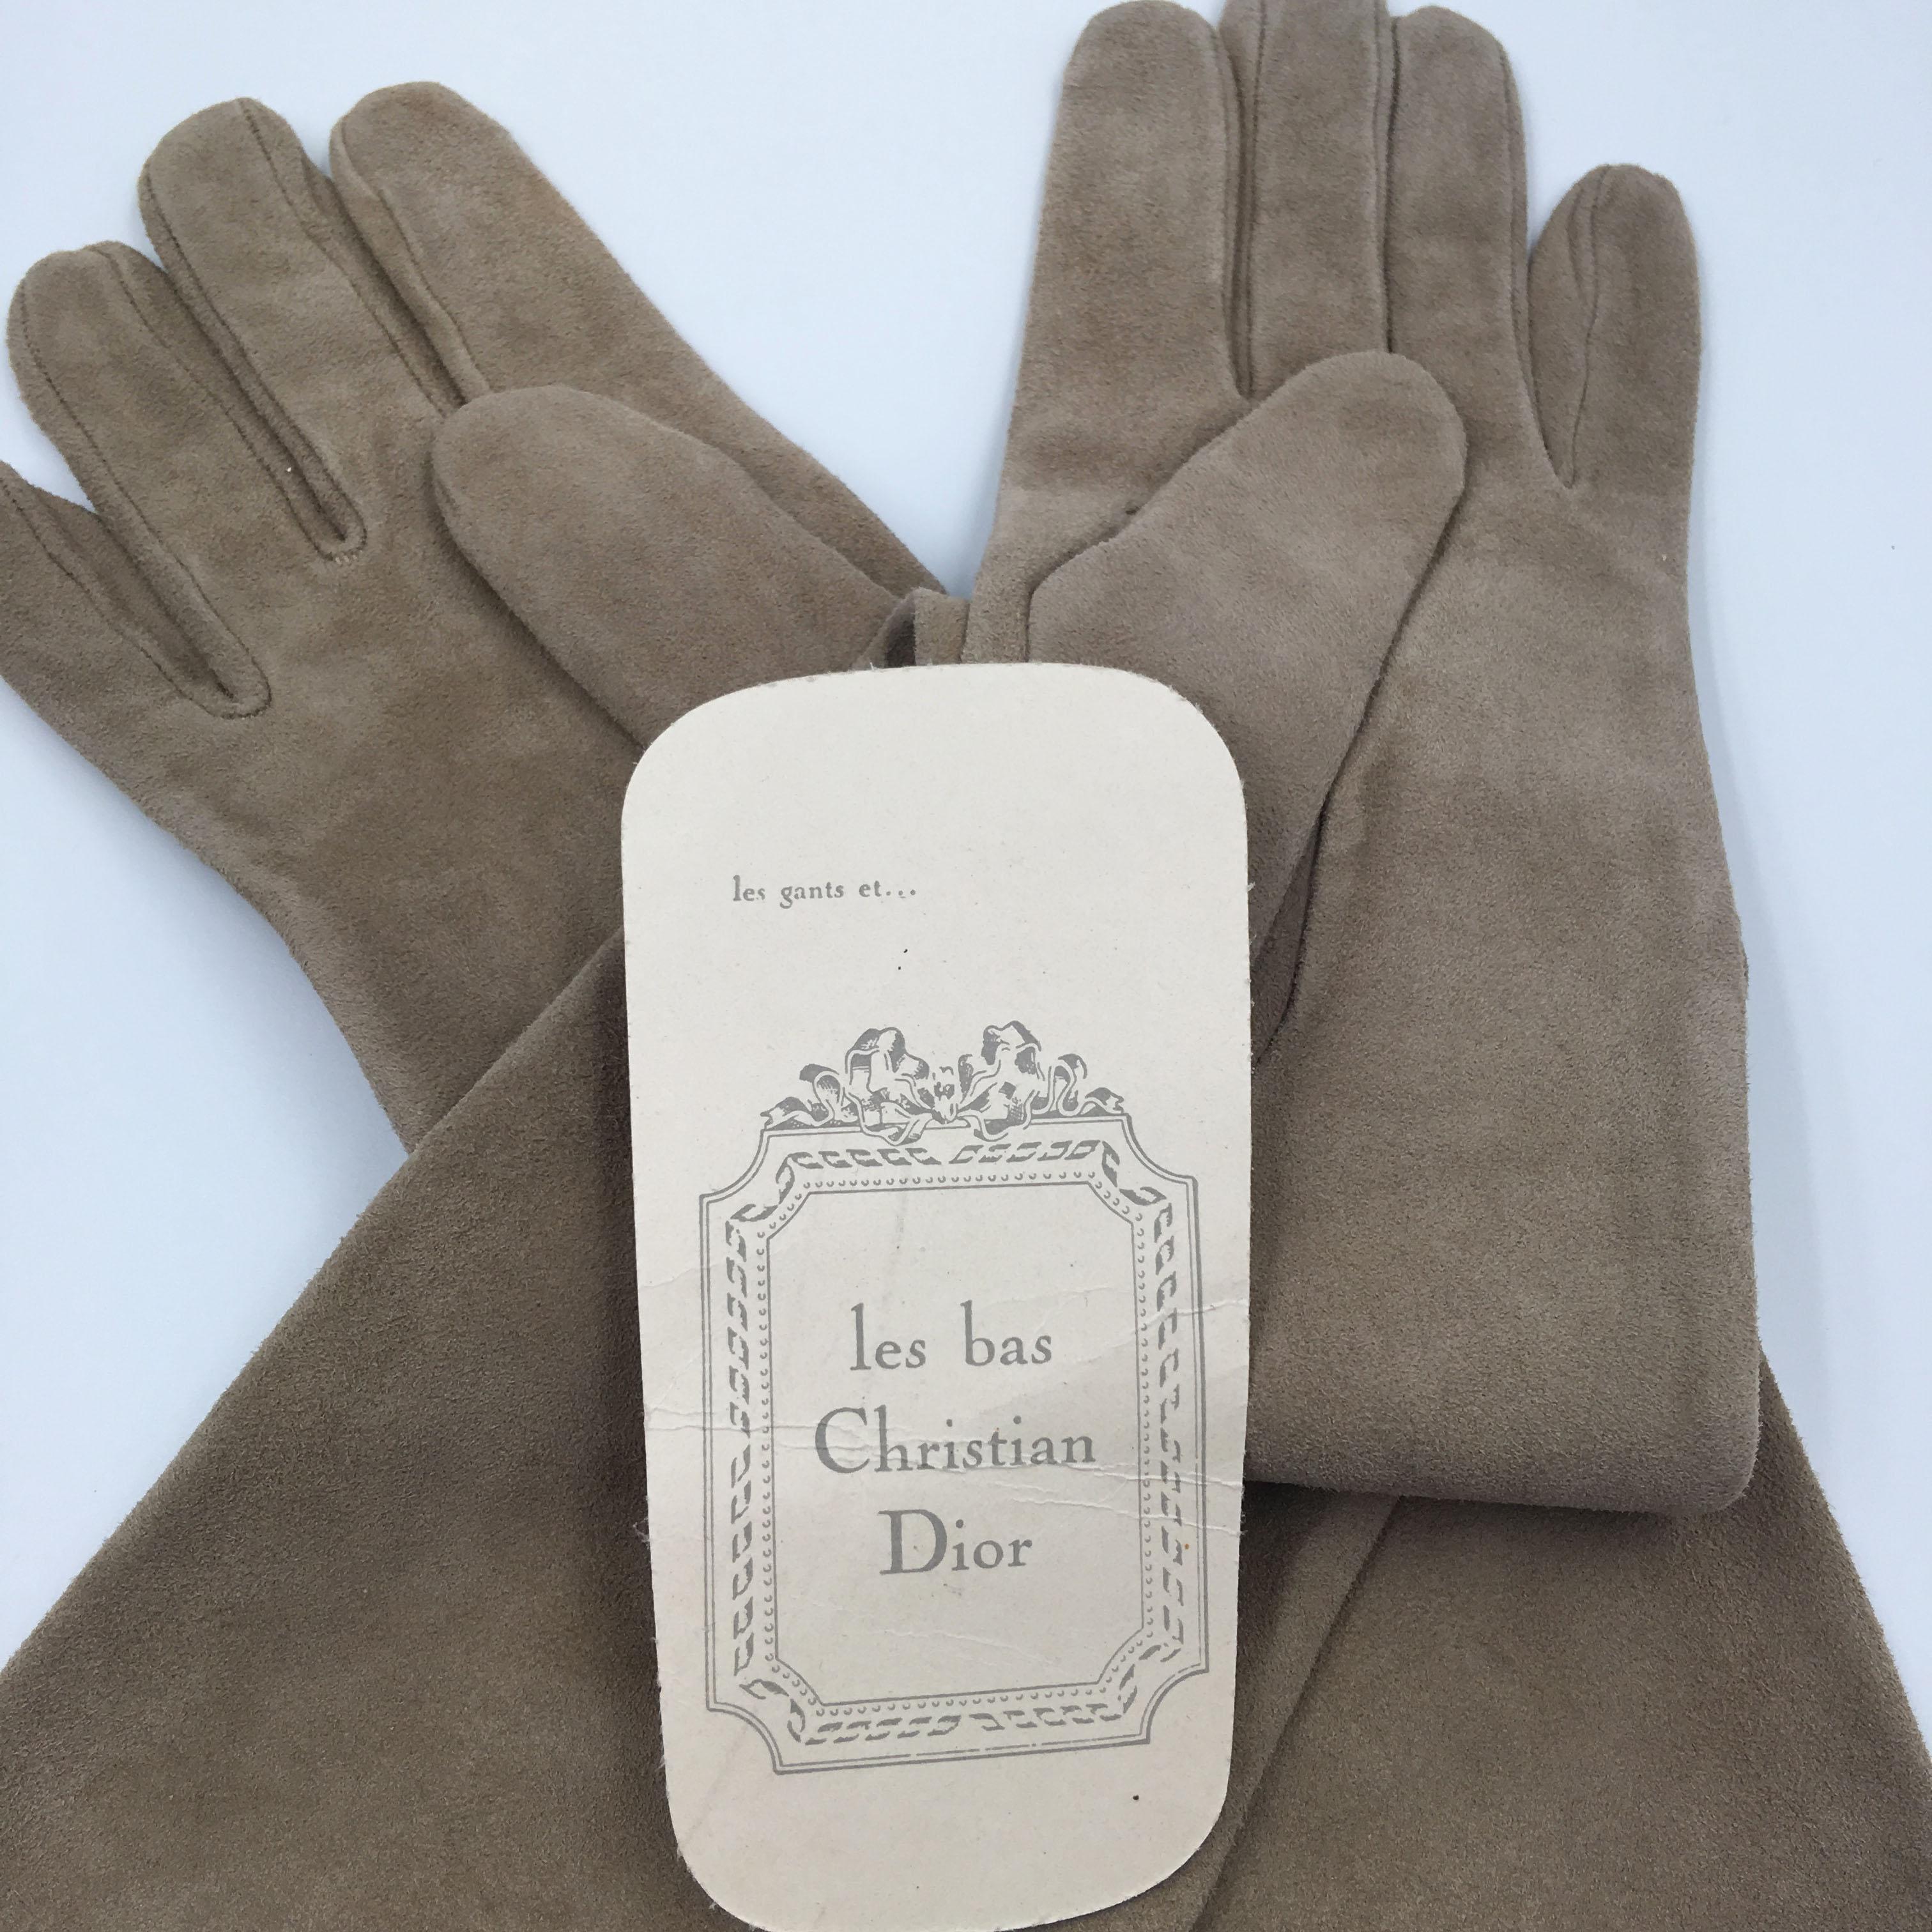 Christian Dior Tan Suede and Lace Trimmed Elbow Length Gloves. Original Christian Dior hang tag attached. Glove size 8. Woven Christian Dior tag inside. Made in France and Cuir Agneau 100% Soir tag. Very good condition. As you can see, from the